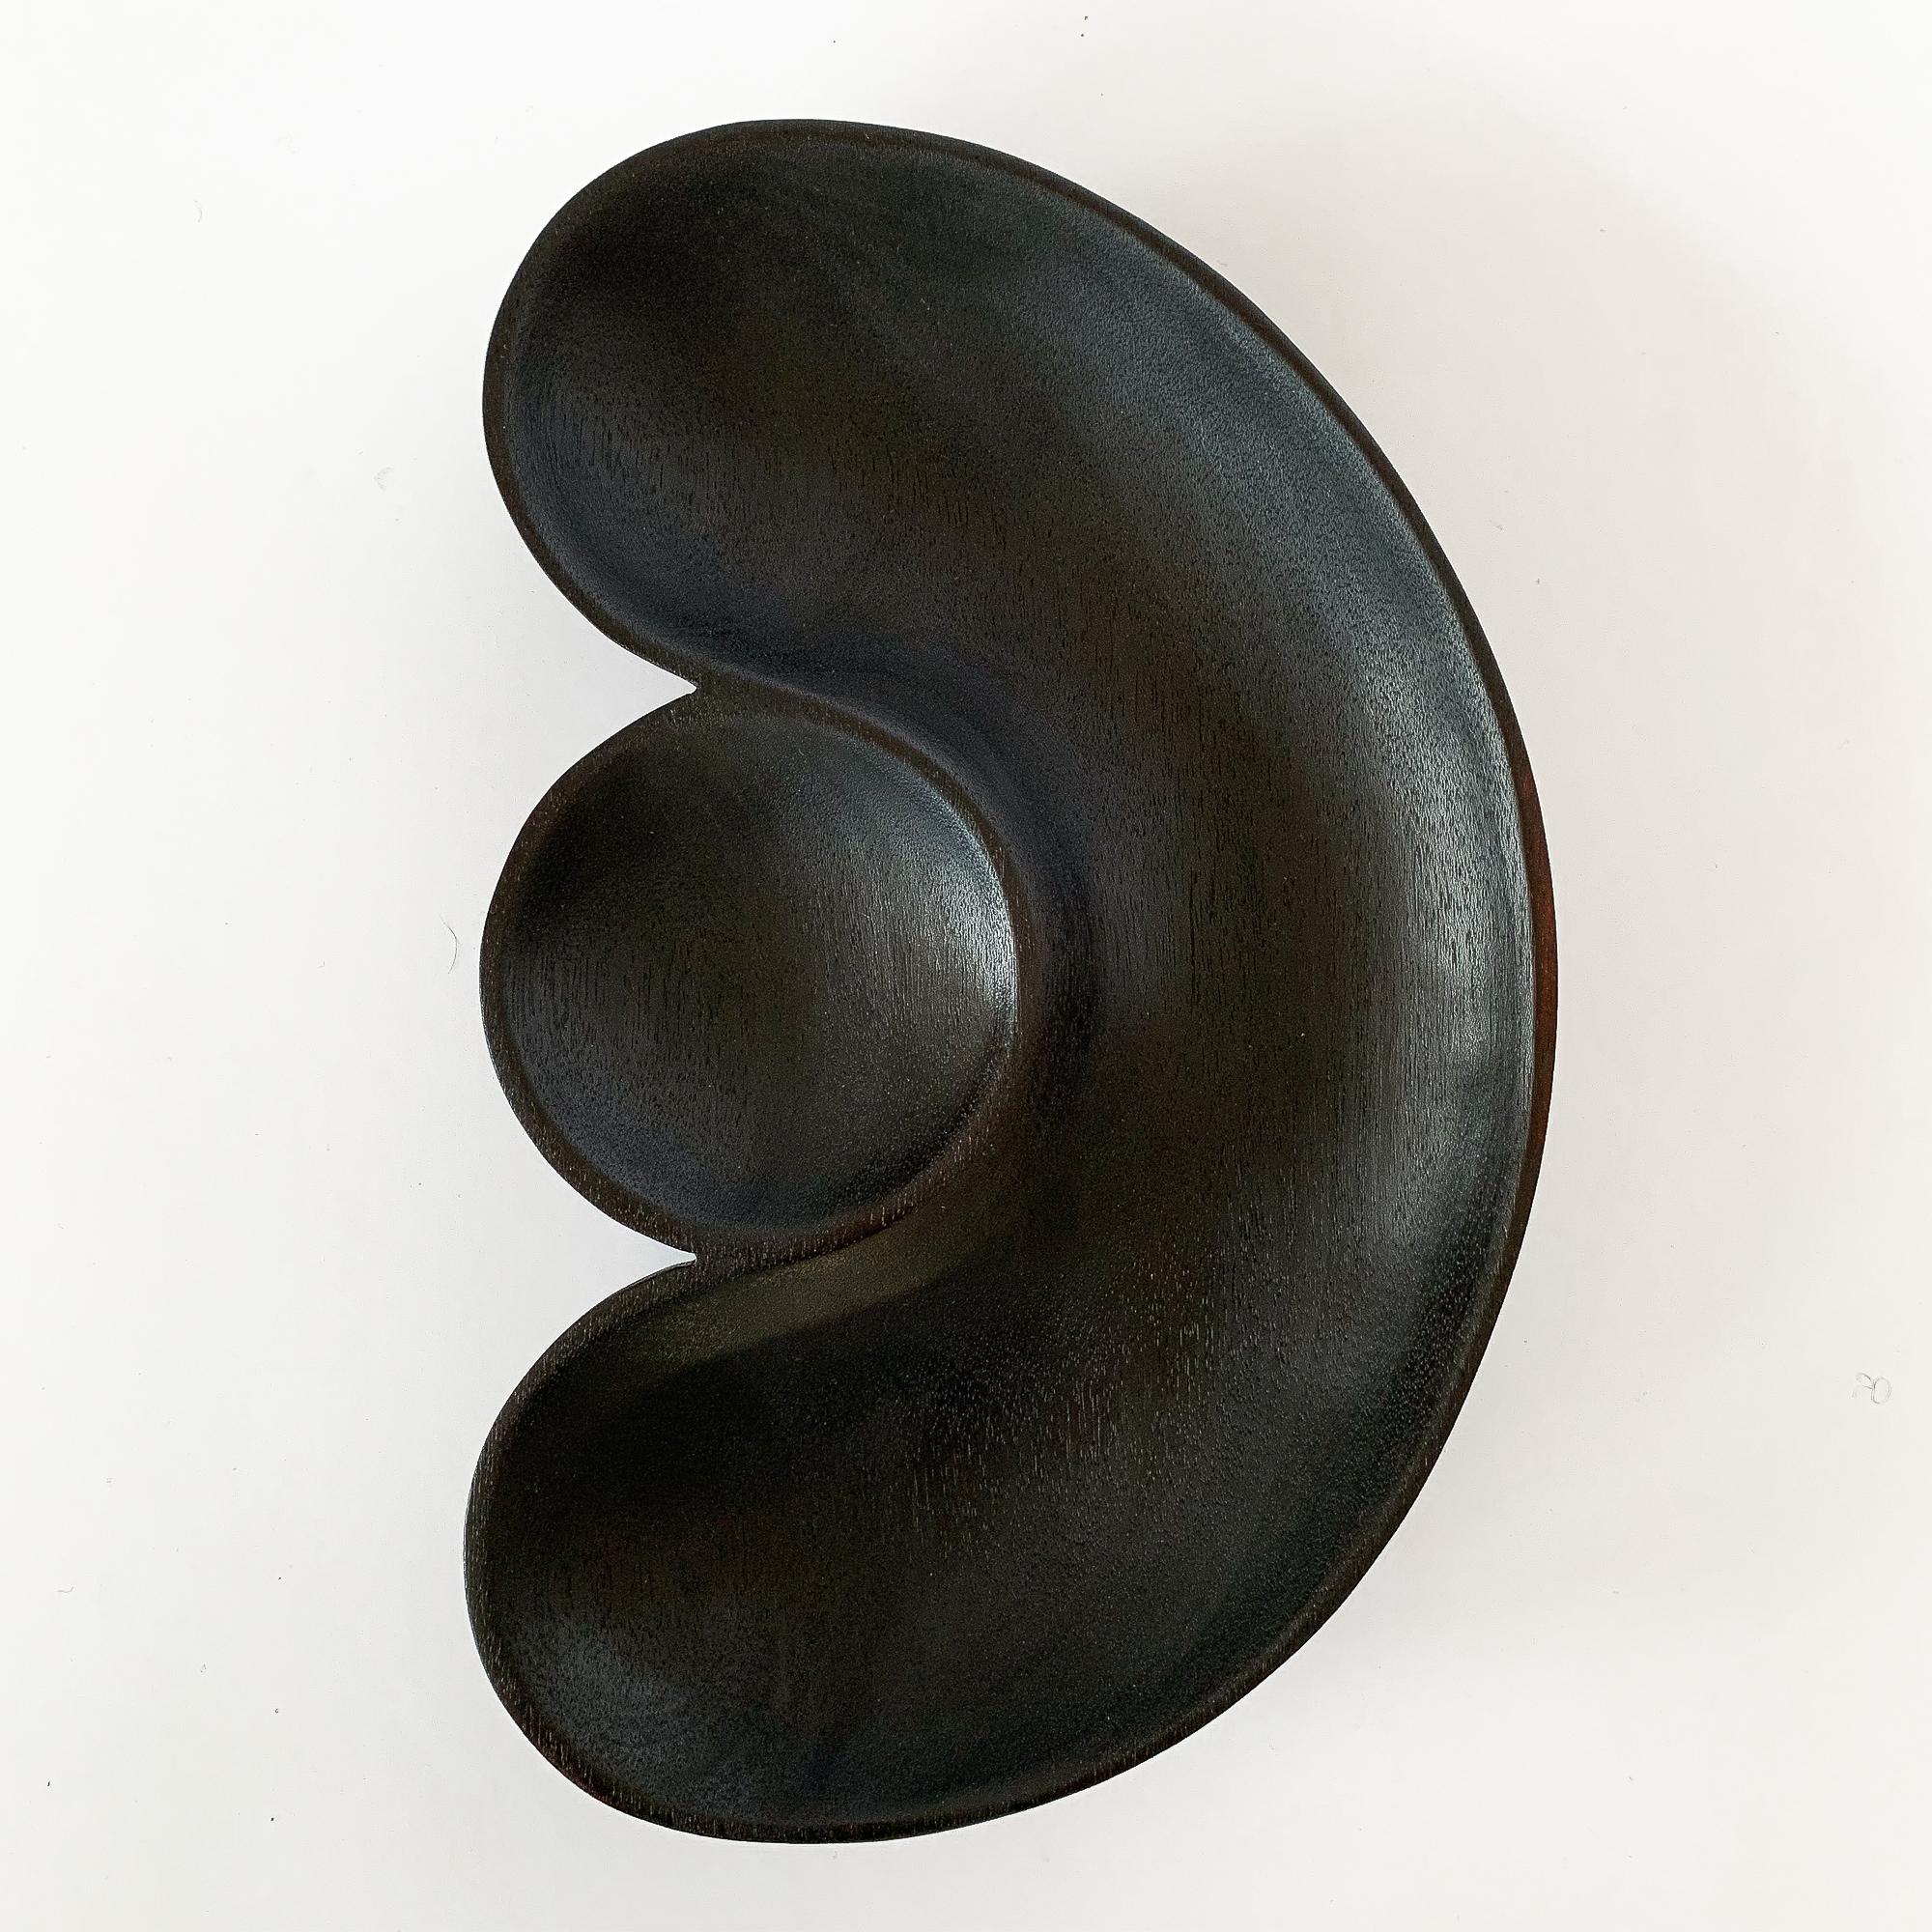 Large sculptural hand carved black ebonized mahogany bowl from the Native Tongue collection by Foxwood Co. Foxwood Co. is the work of Casey Reed Johnson, a designer and sculptor whose work is inspired by function and driven by form. His current work